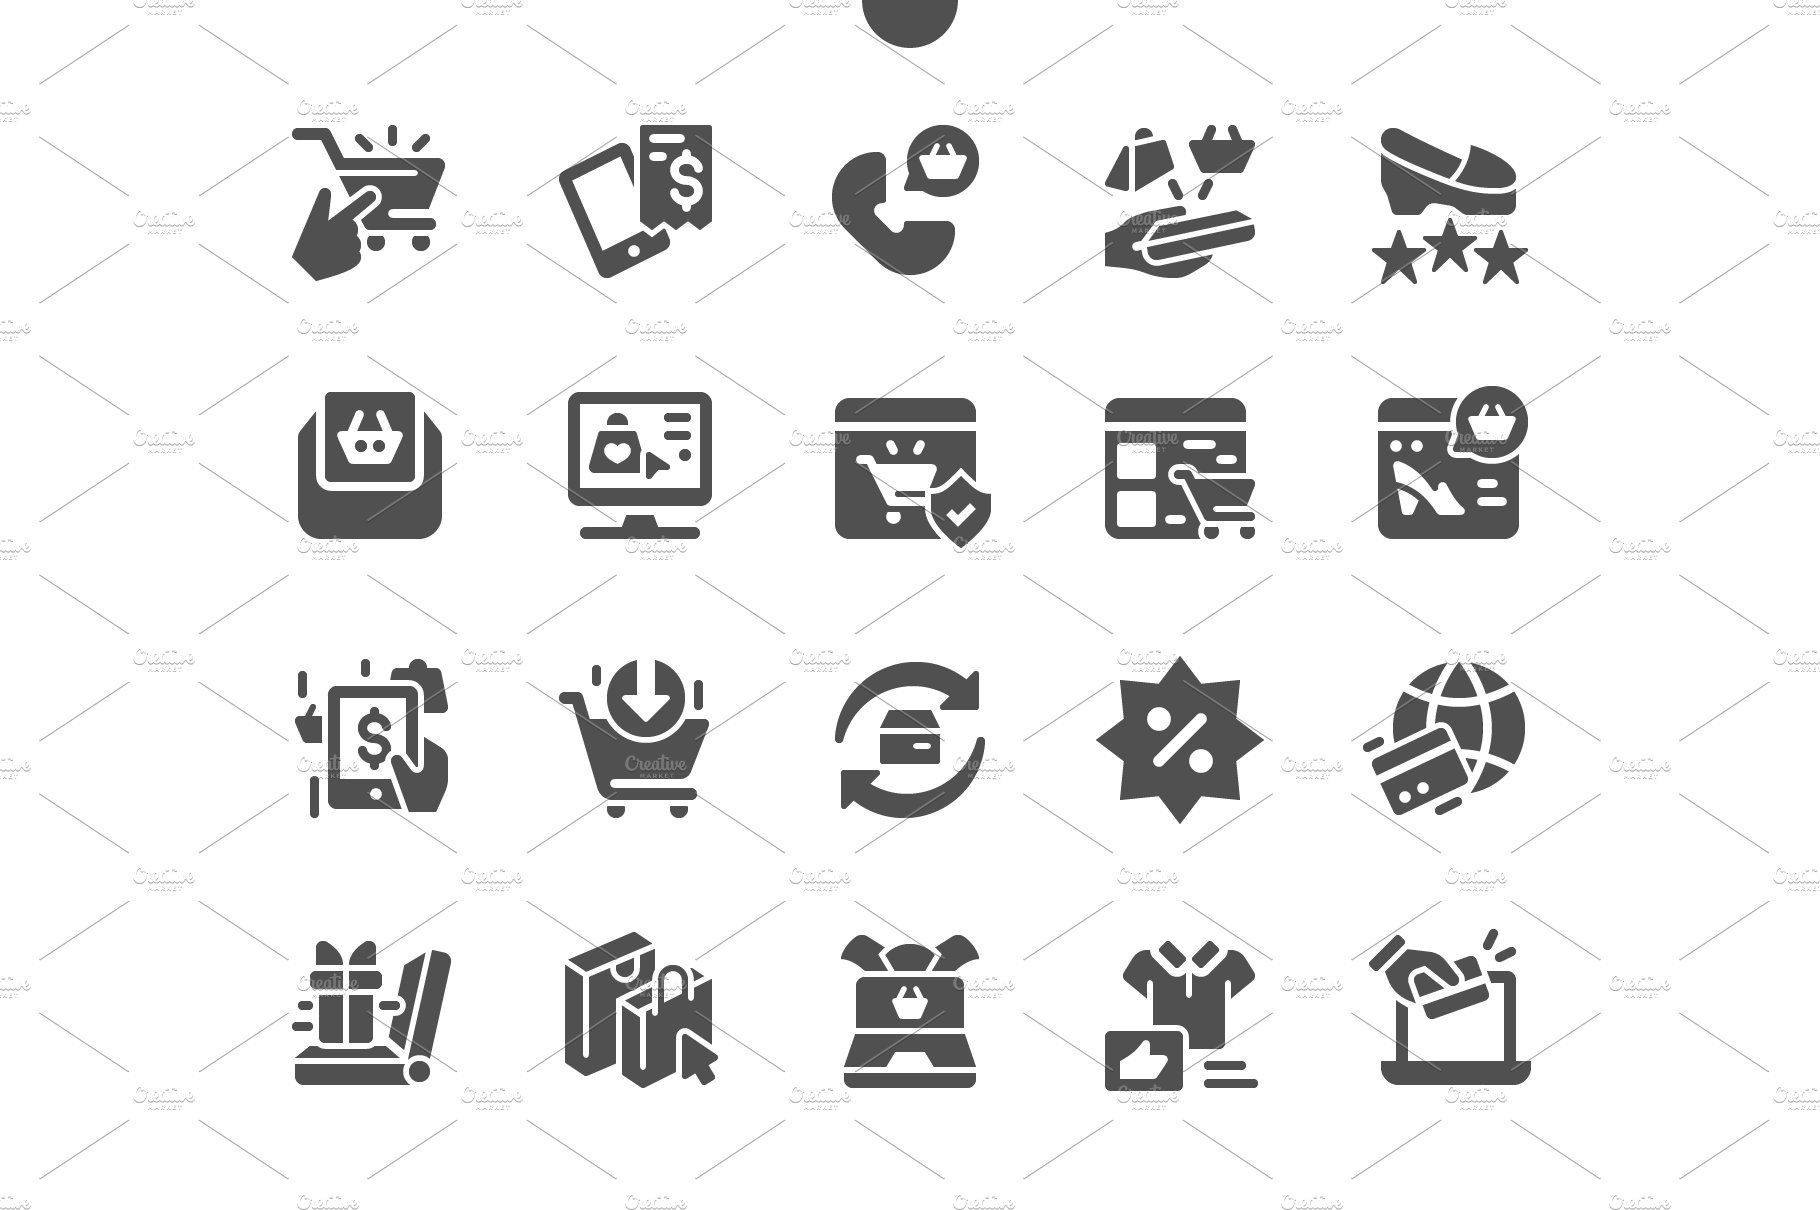 E-commerce Icons cover image.